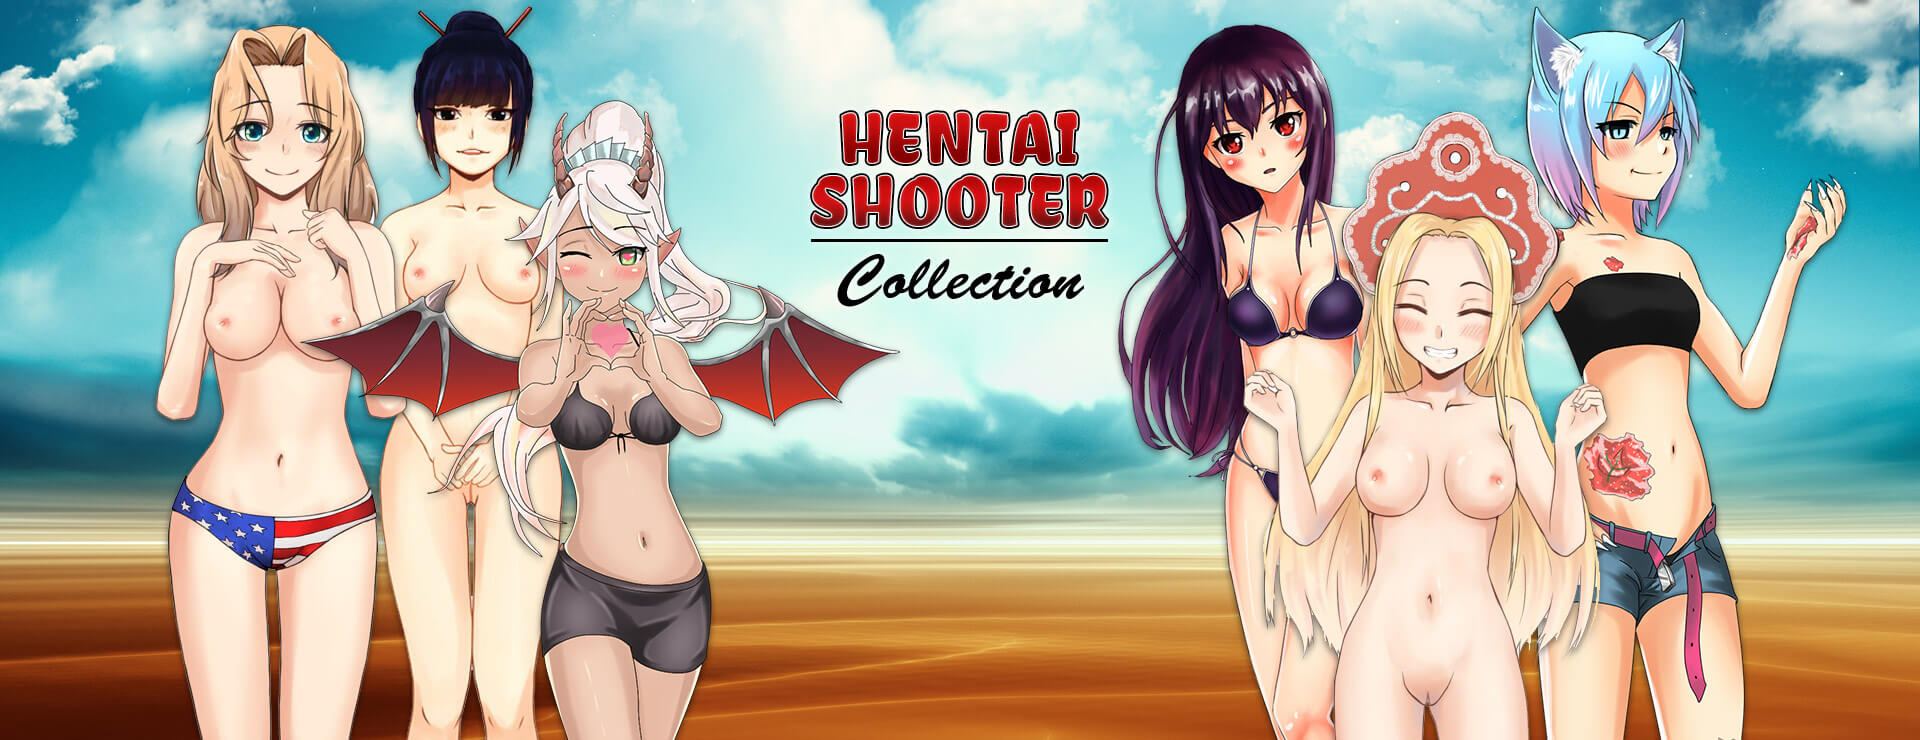 Hentai Shooter 3D - Complete Collection - カジュアル ゲーム